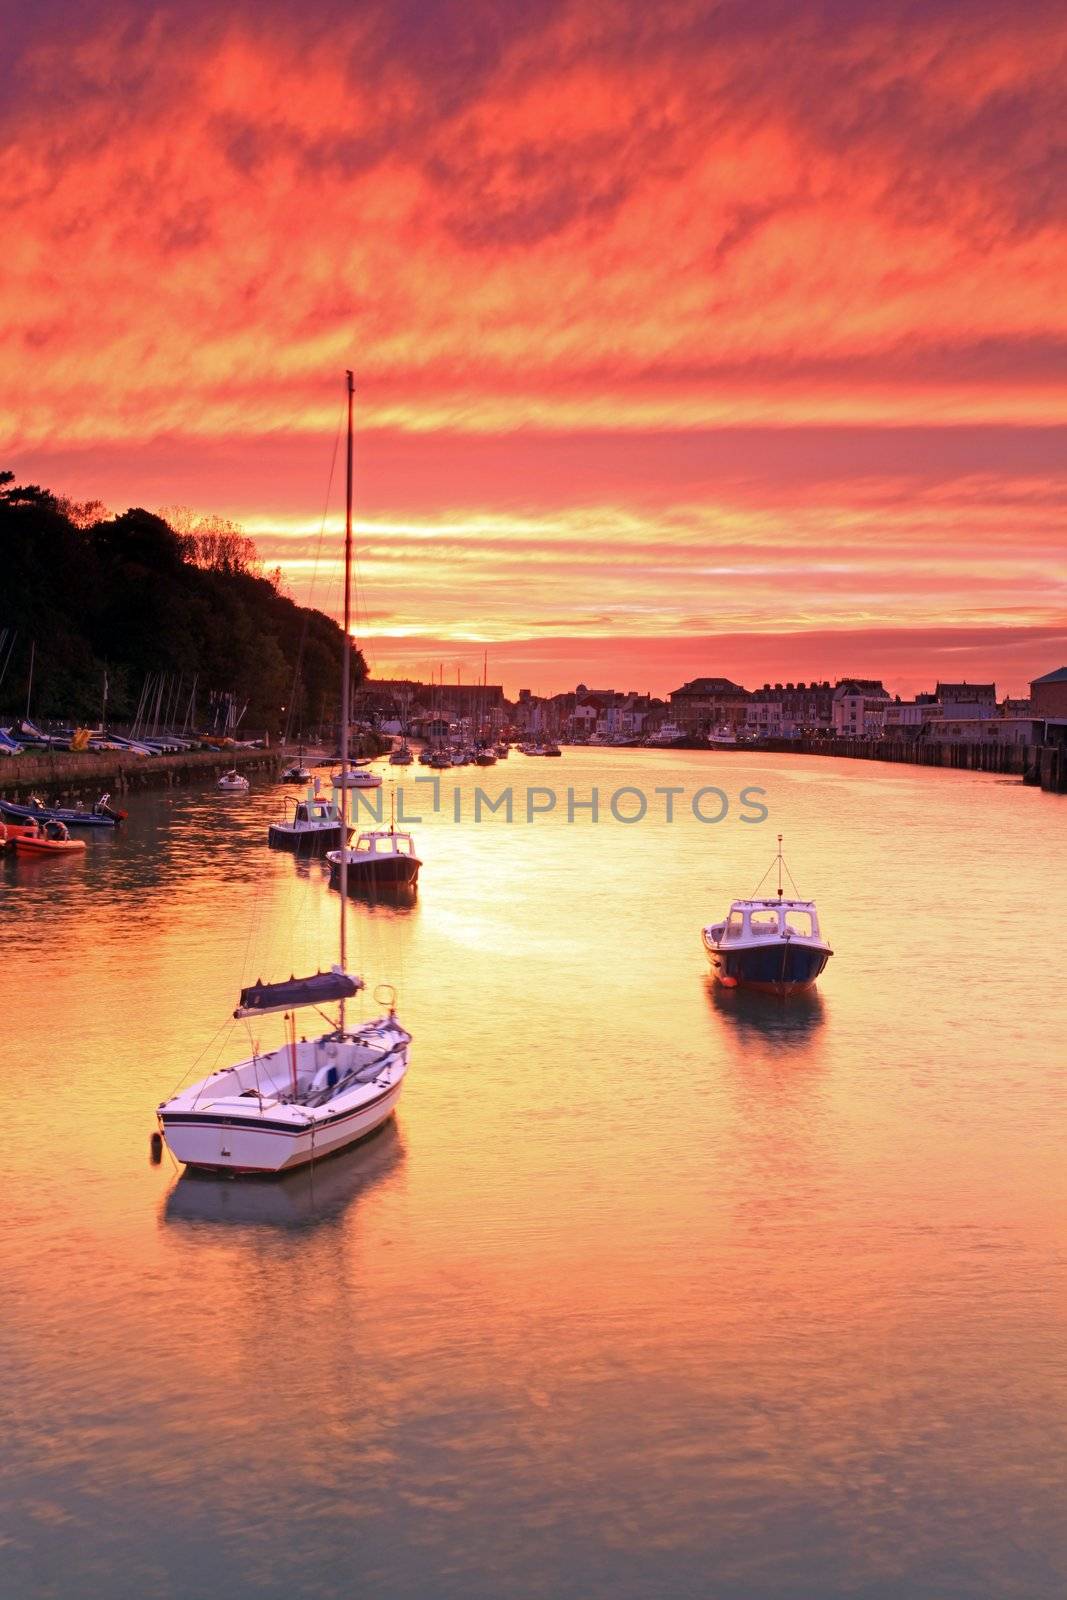 Sunset Weymouth Harbour England by olliemt